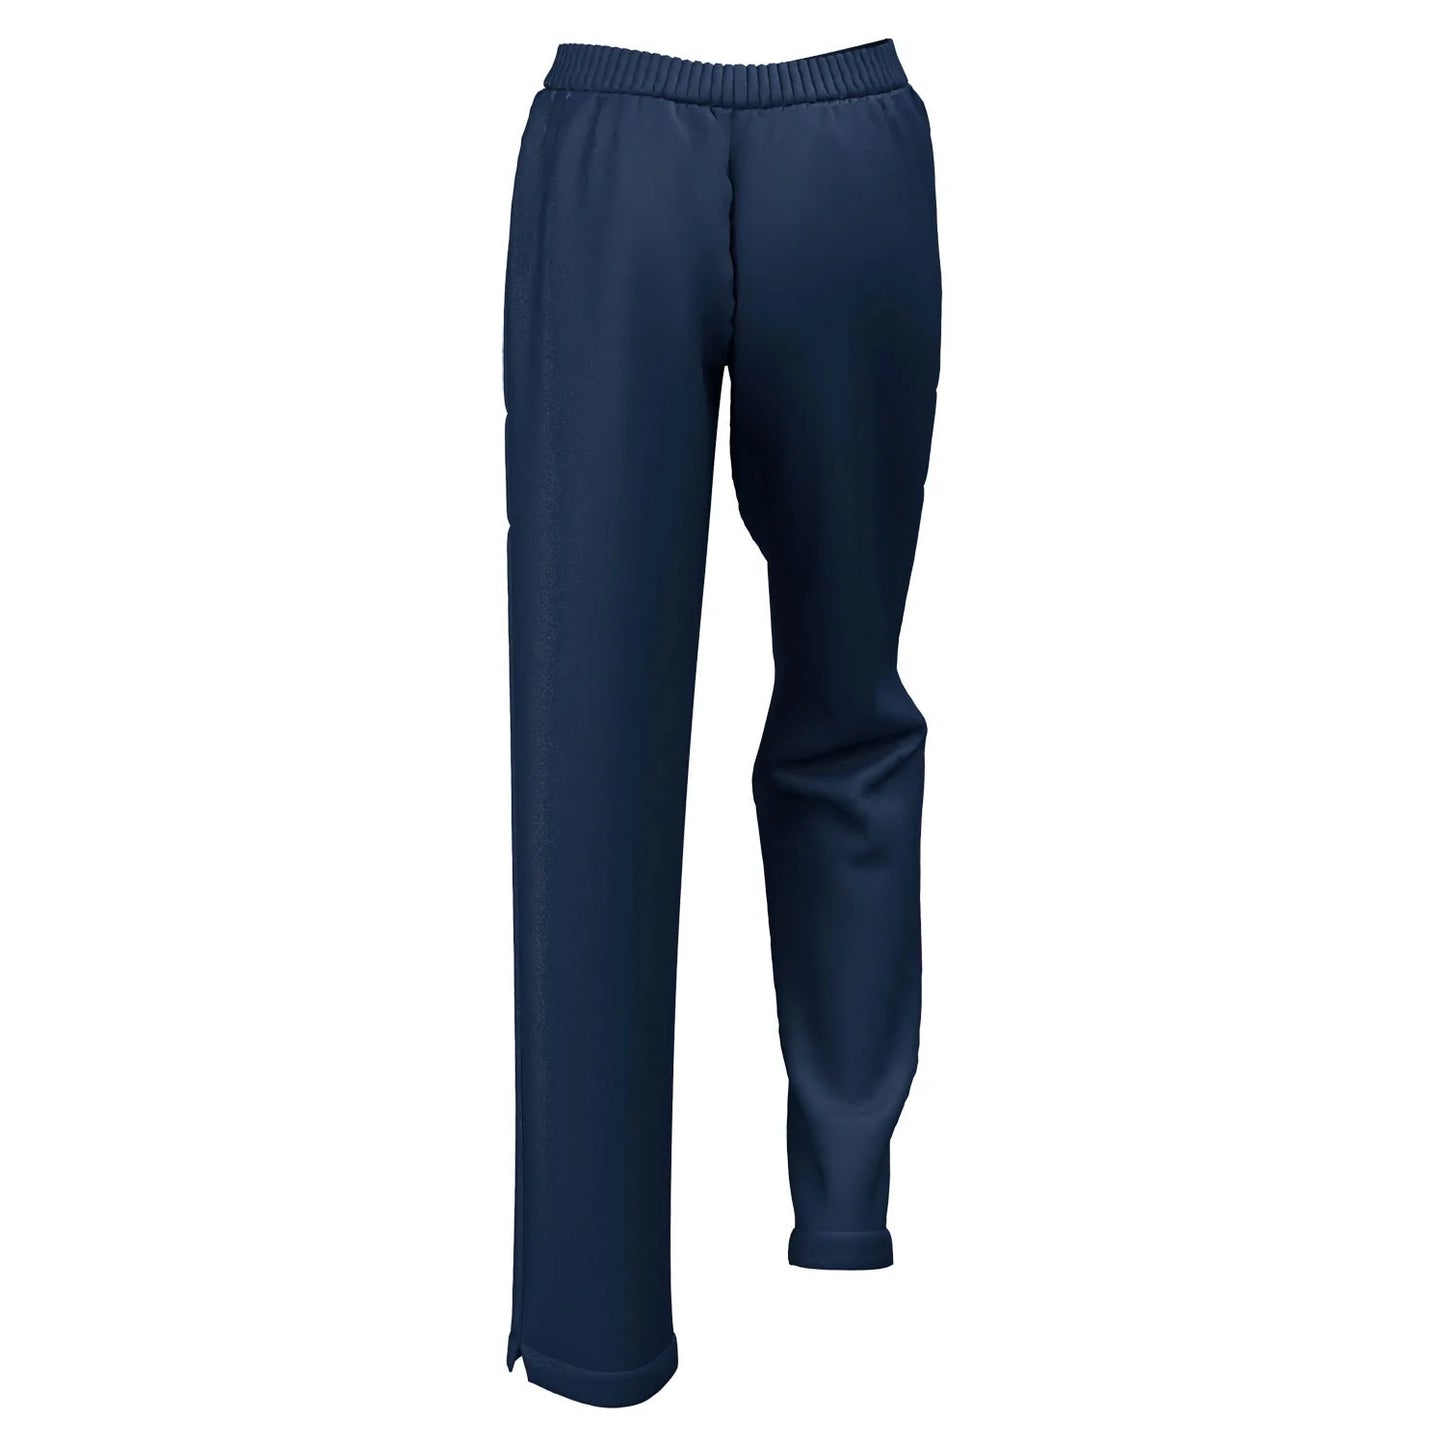 Wadham College Boat Club Women's Fit Standard Tracksuit Trousers